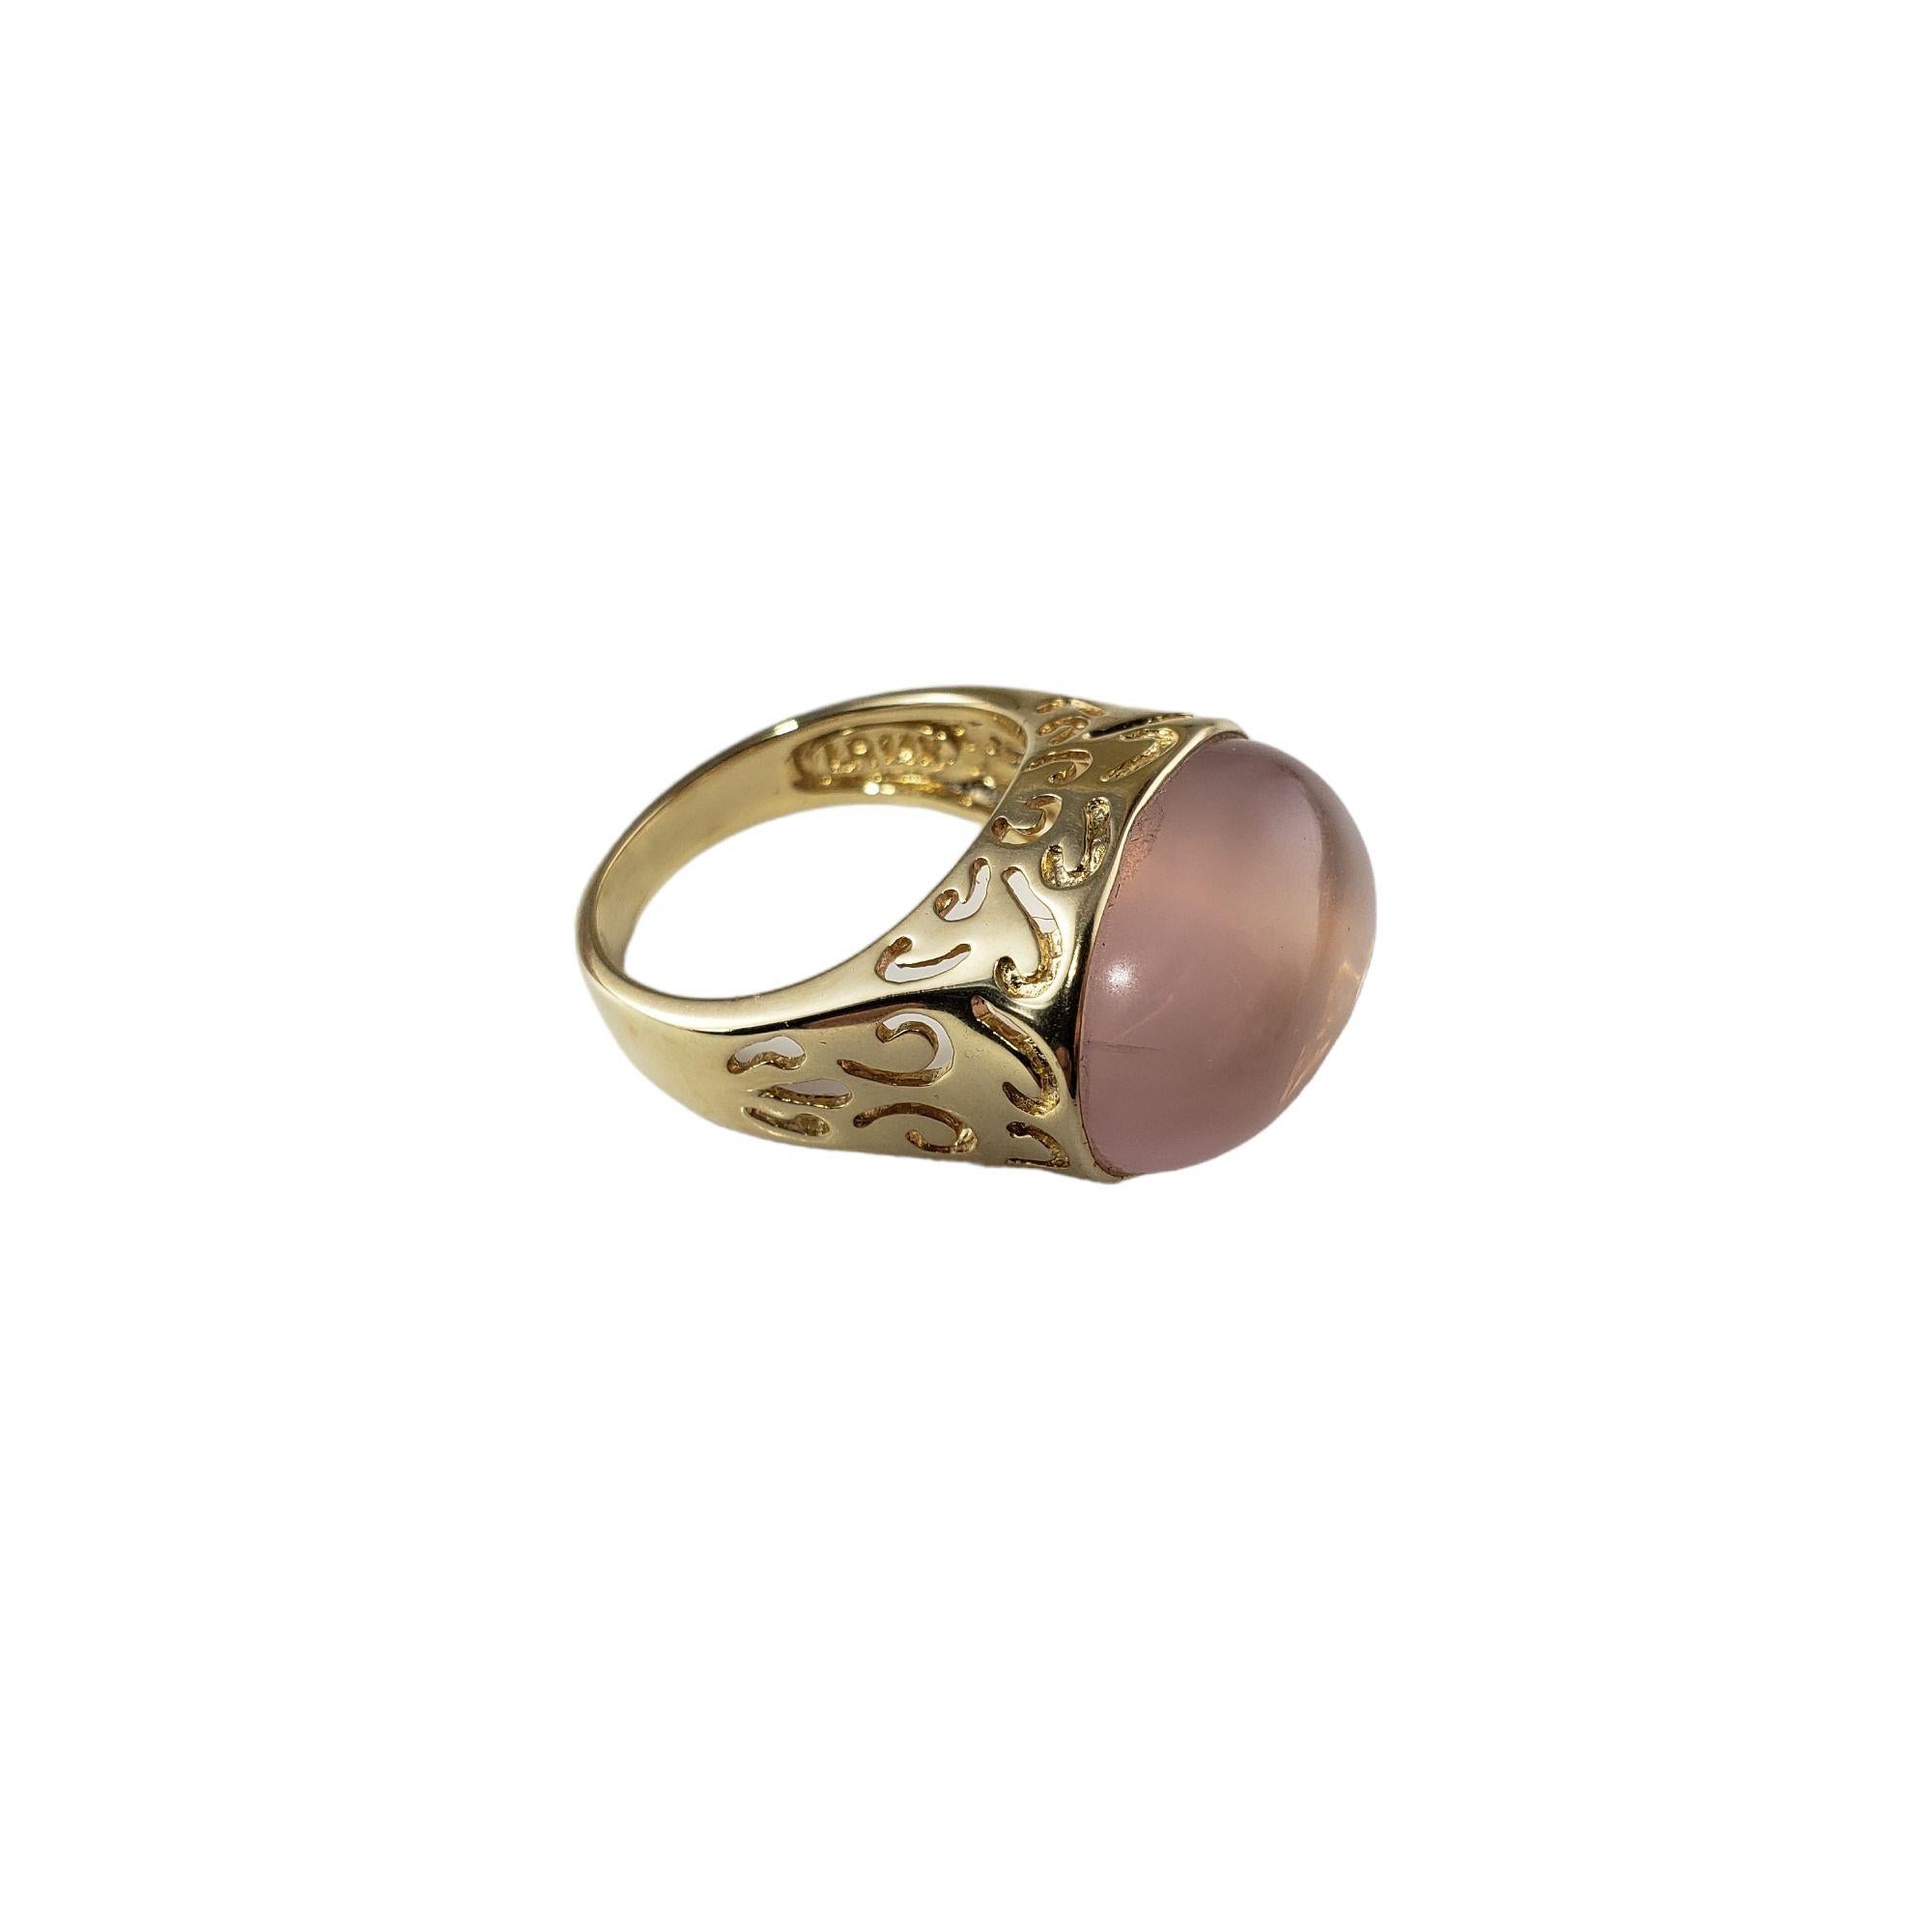 Vintage 14 Karat Yellow Gold and Rose Quartz Ring Size 7-

This lovely ring features one oval cabochon rose quartz stone (18 mm x 14 mm) set in beautifully detailed 14K yellow gold.
Height: 13 mm
Shank: 3 mm

Ring Size: 7

Weight: 5.5 dwt. / 8.7